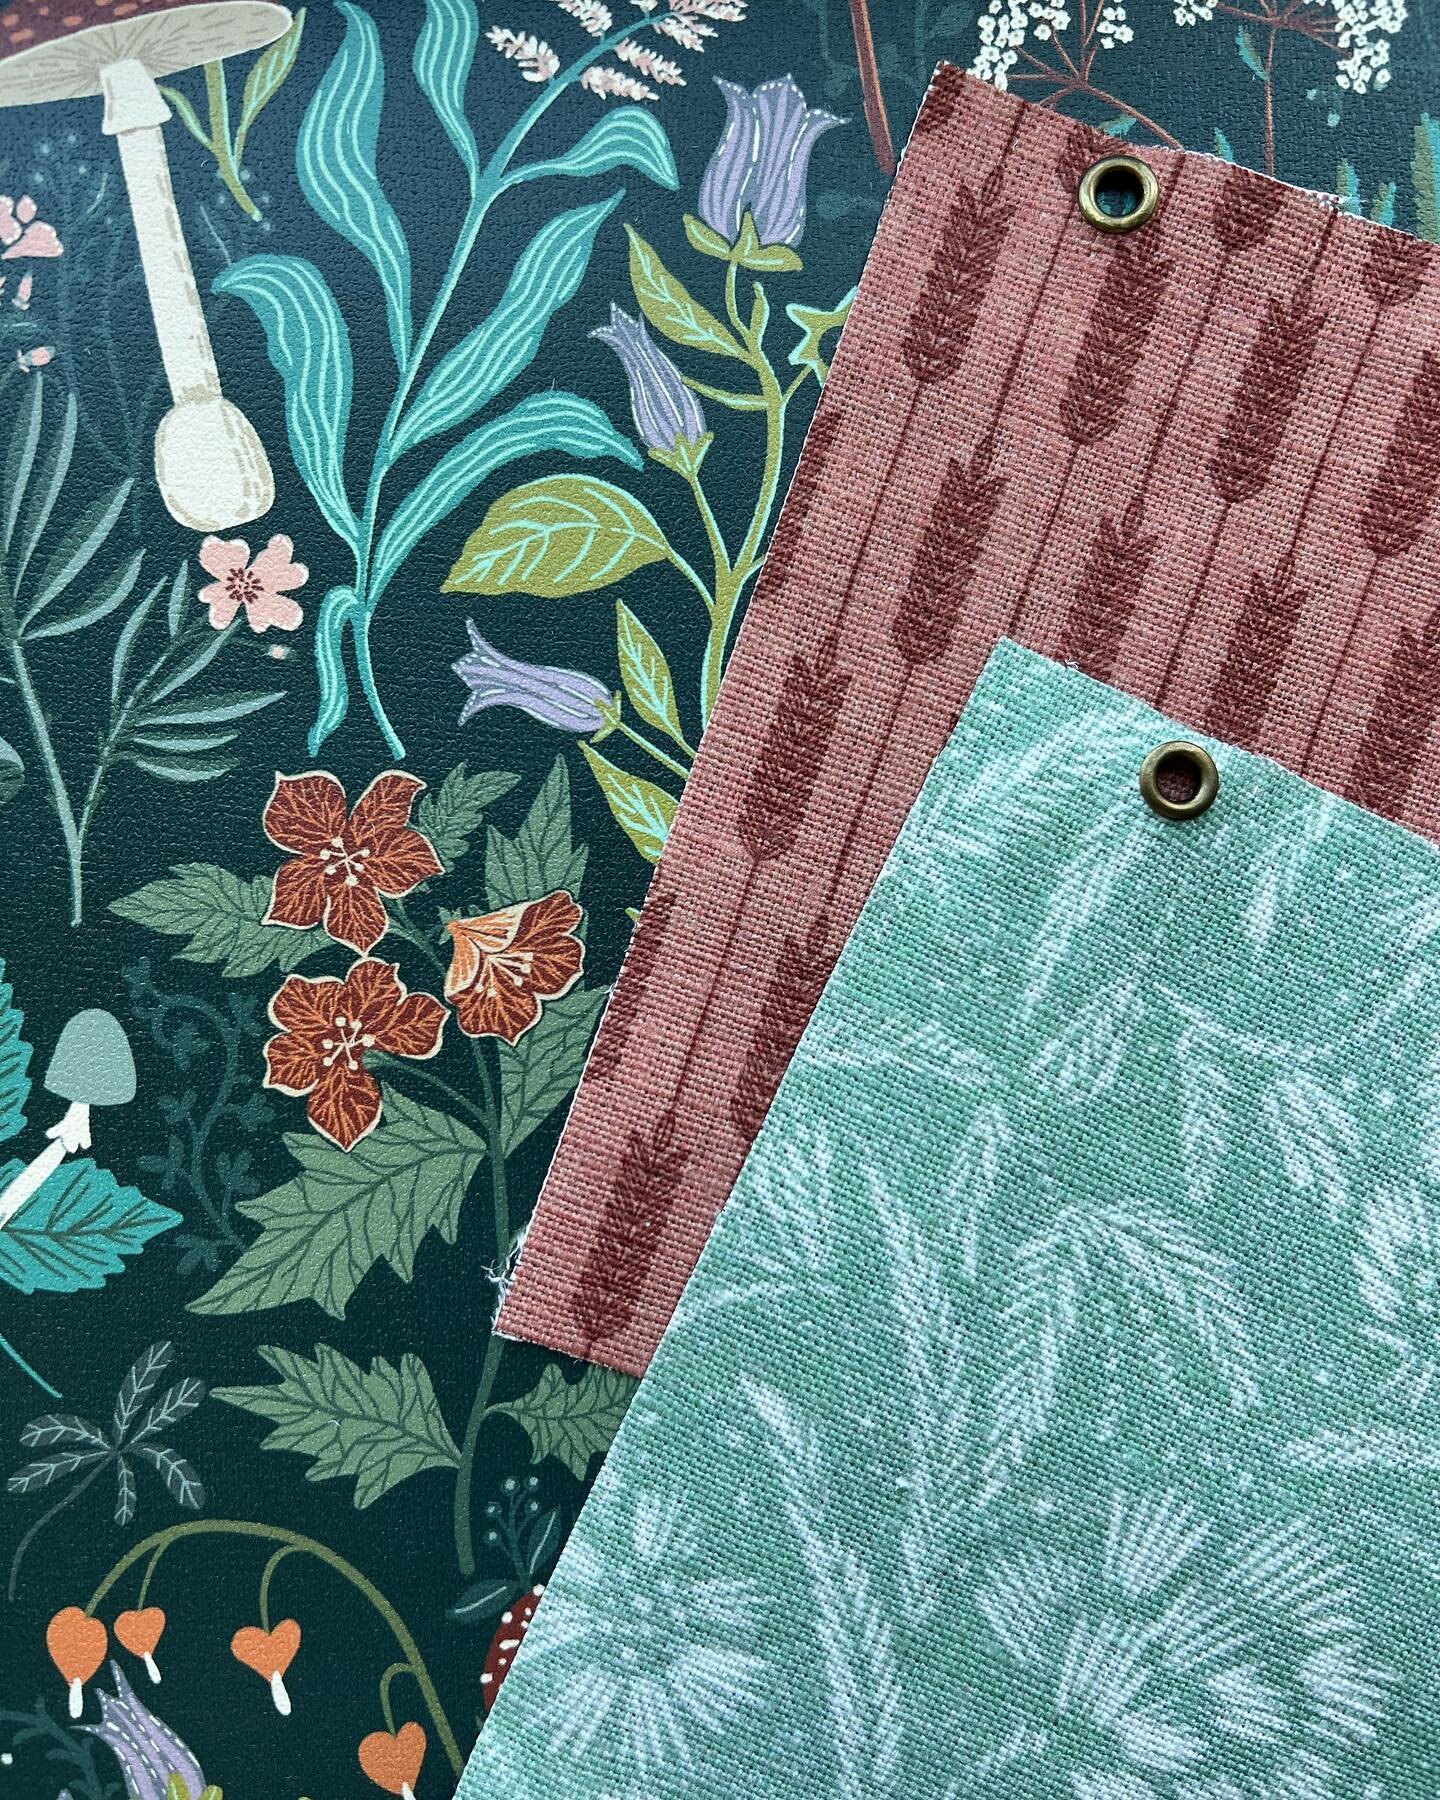 Moody botanical fabric wallpaper combo&hellip;
Patterns featured - Beautiful Poisons, Astrella Paisley, Wheat Leaf, Flowers for Emma and Stargazer. 
.
.
.
#moodybotanicals #wallpaper #darkbotanical #darkacademia #moodywallpaper #interiors #botanicalp